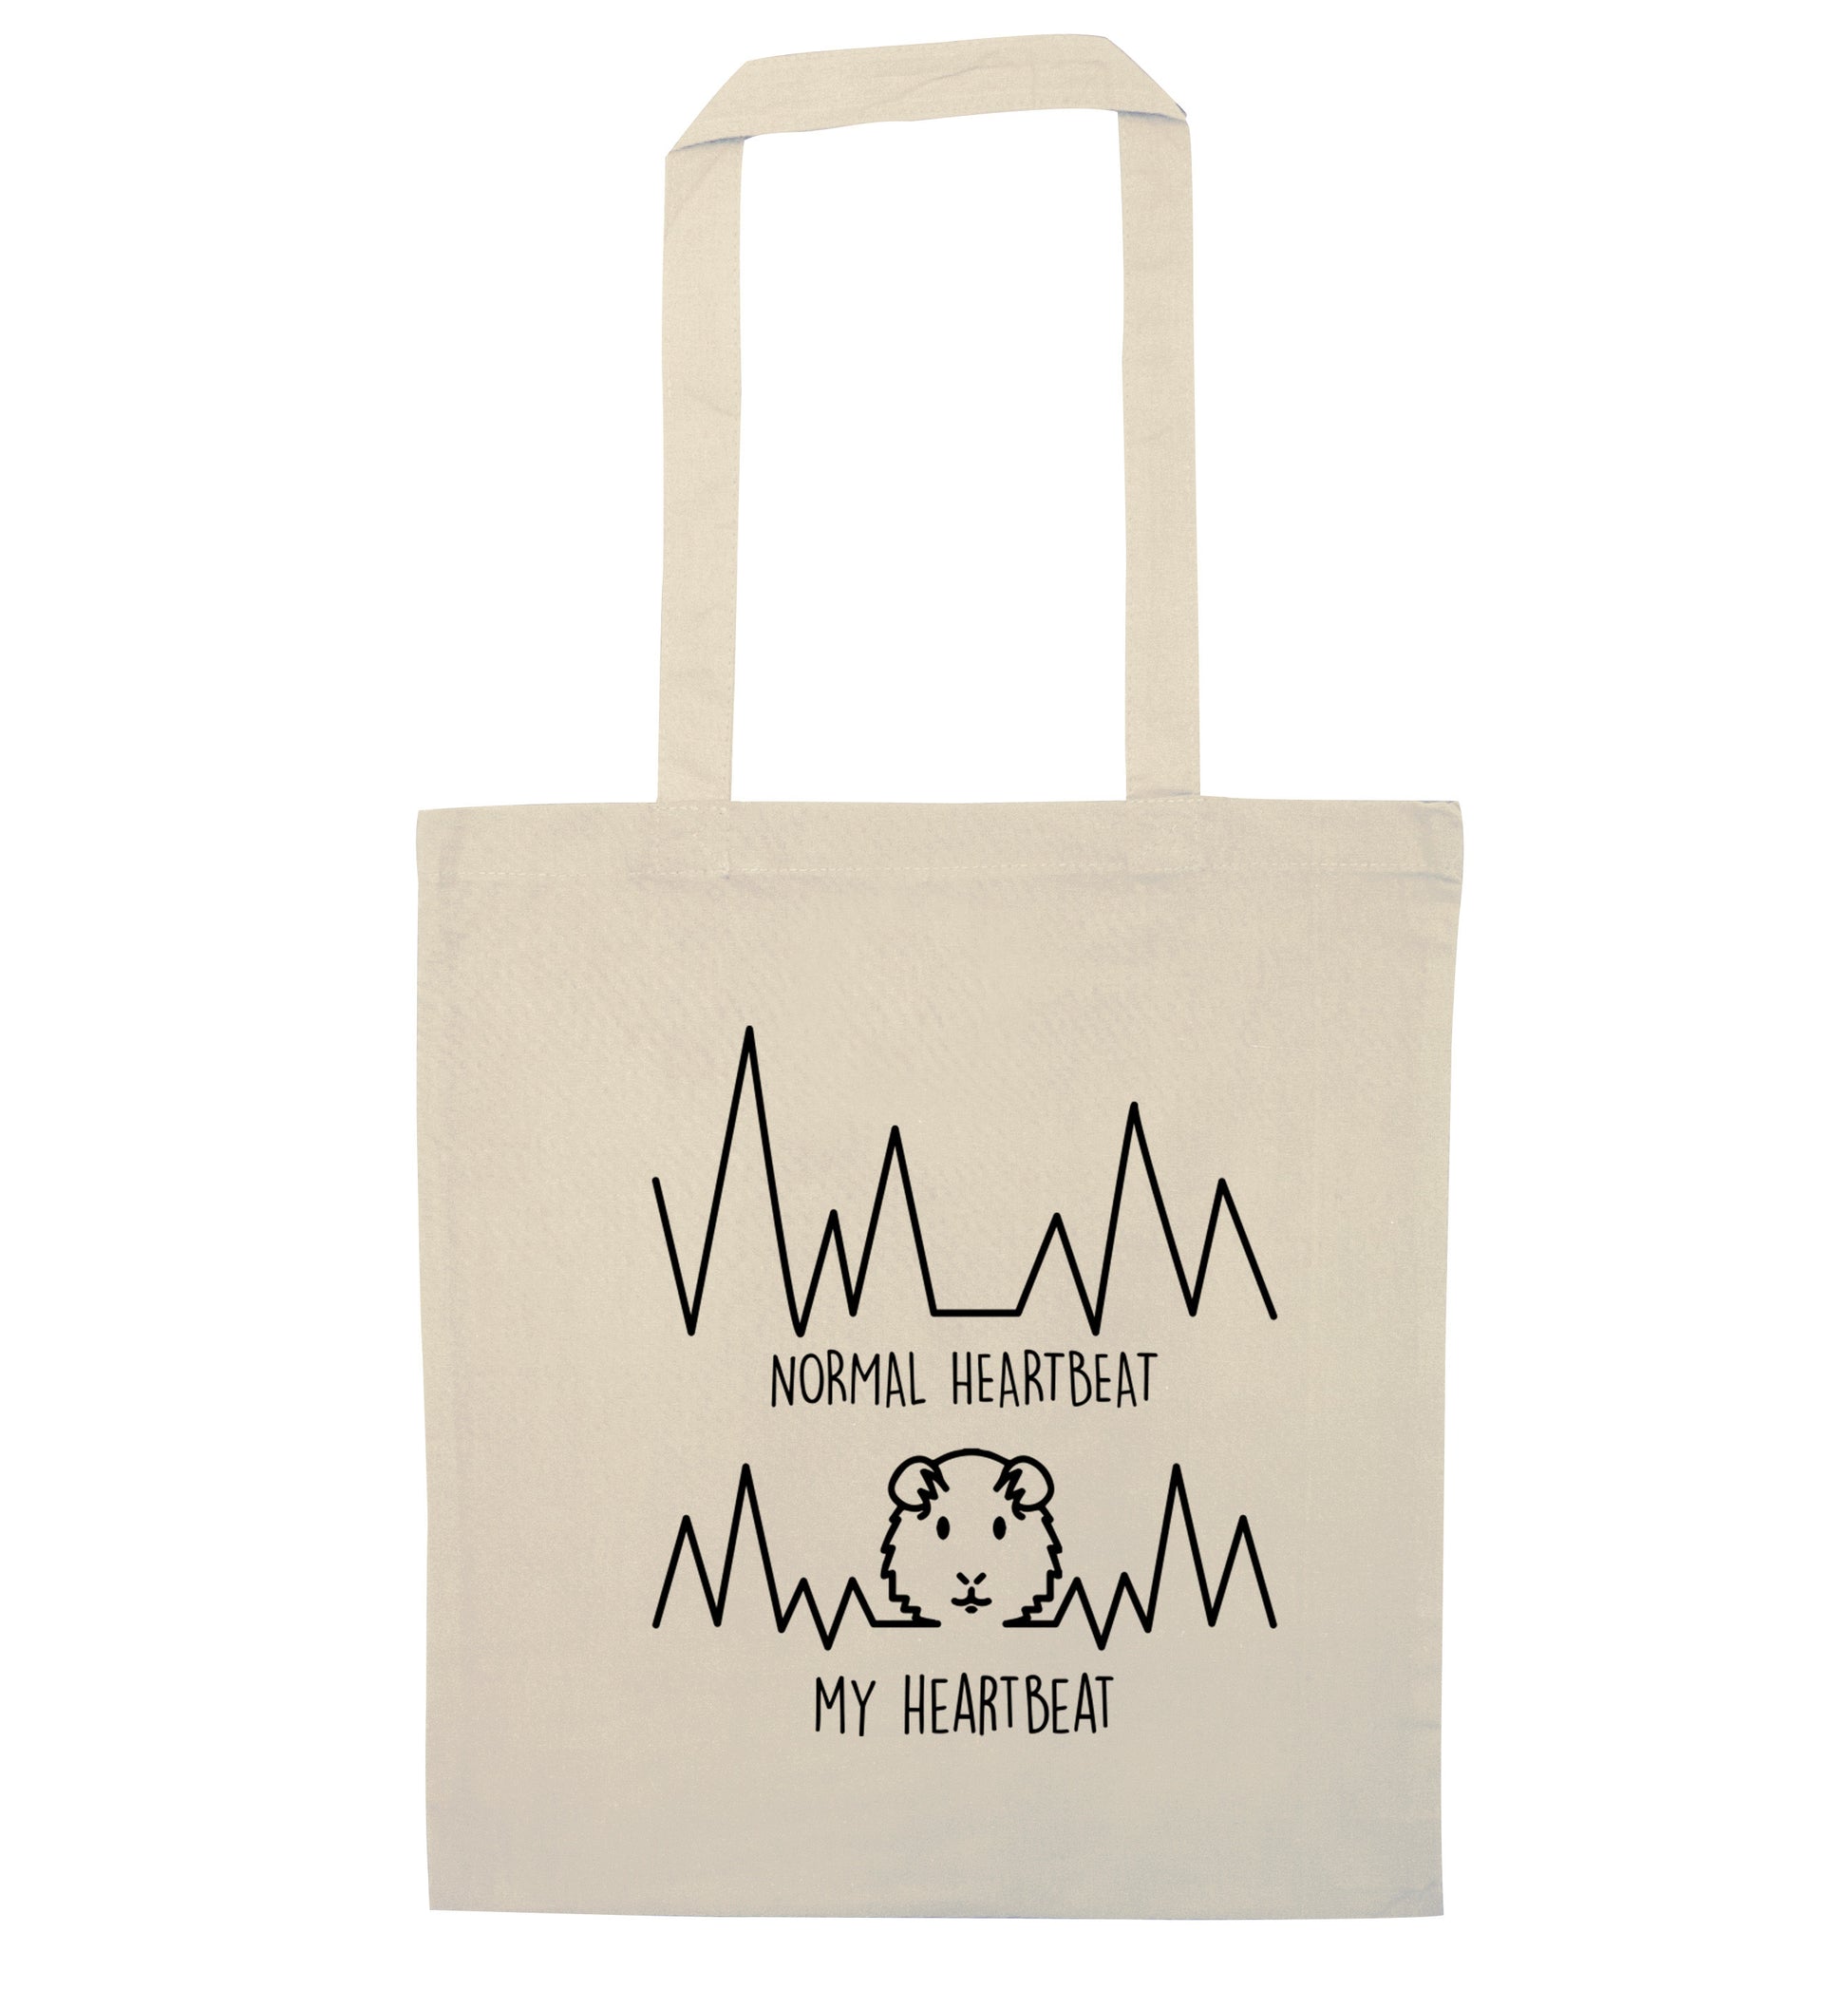 Normal heartbeat vs my heartbeat guinea pig lover natural tote bag